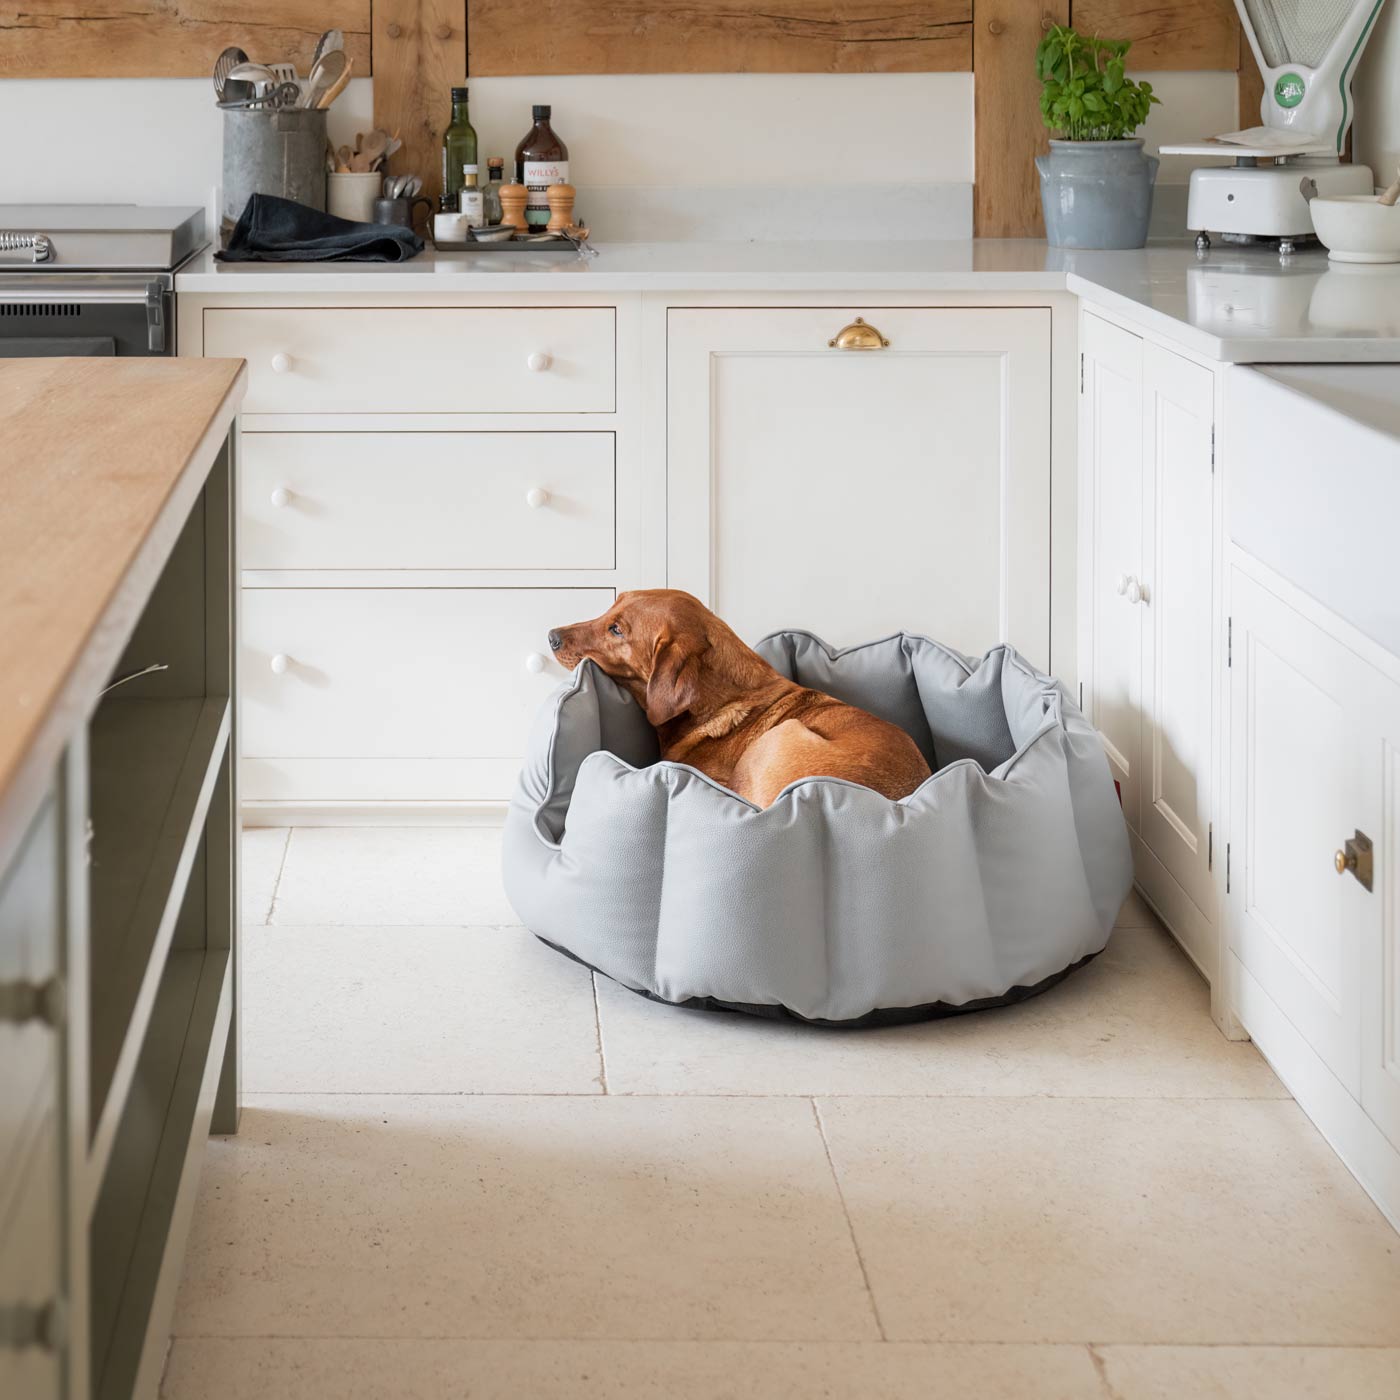 Luxury Handmade High Wall in Rhino Tough Jungle Faux Leather, in Granite, Perfect For Your Pets Nap Time! Available To Personalize at Lords & Labradors US